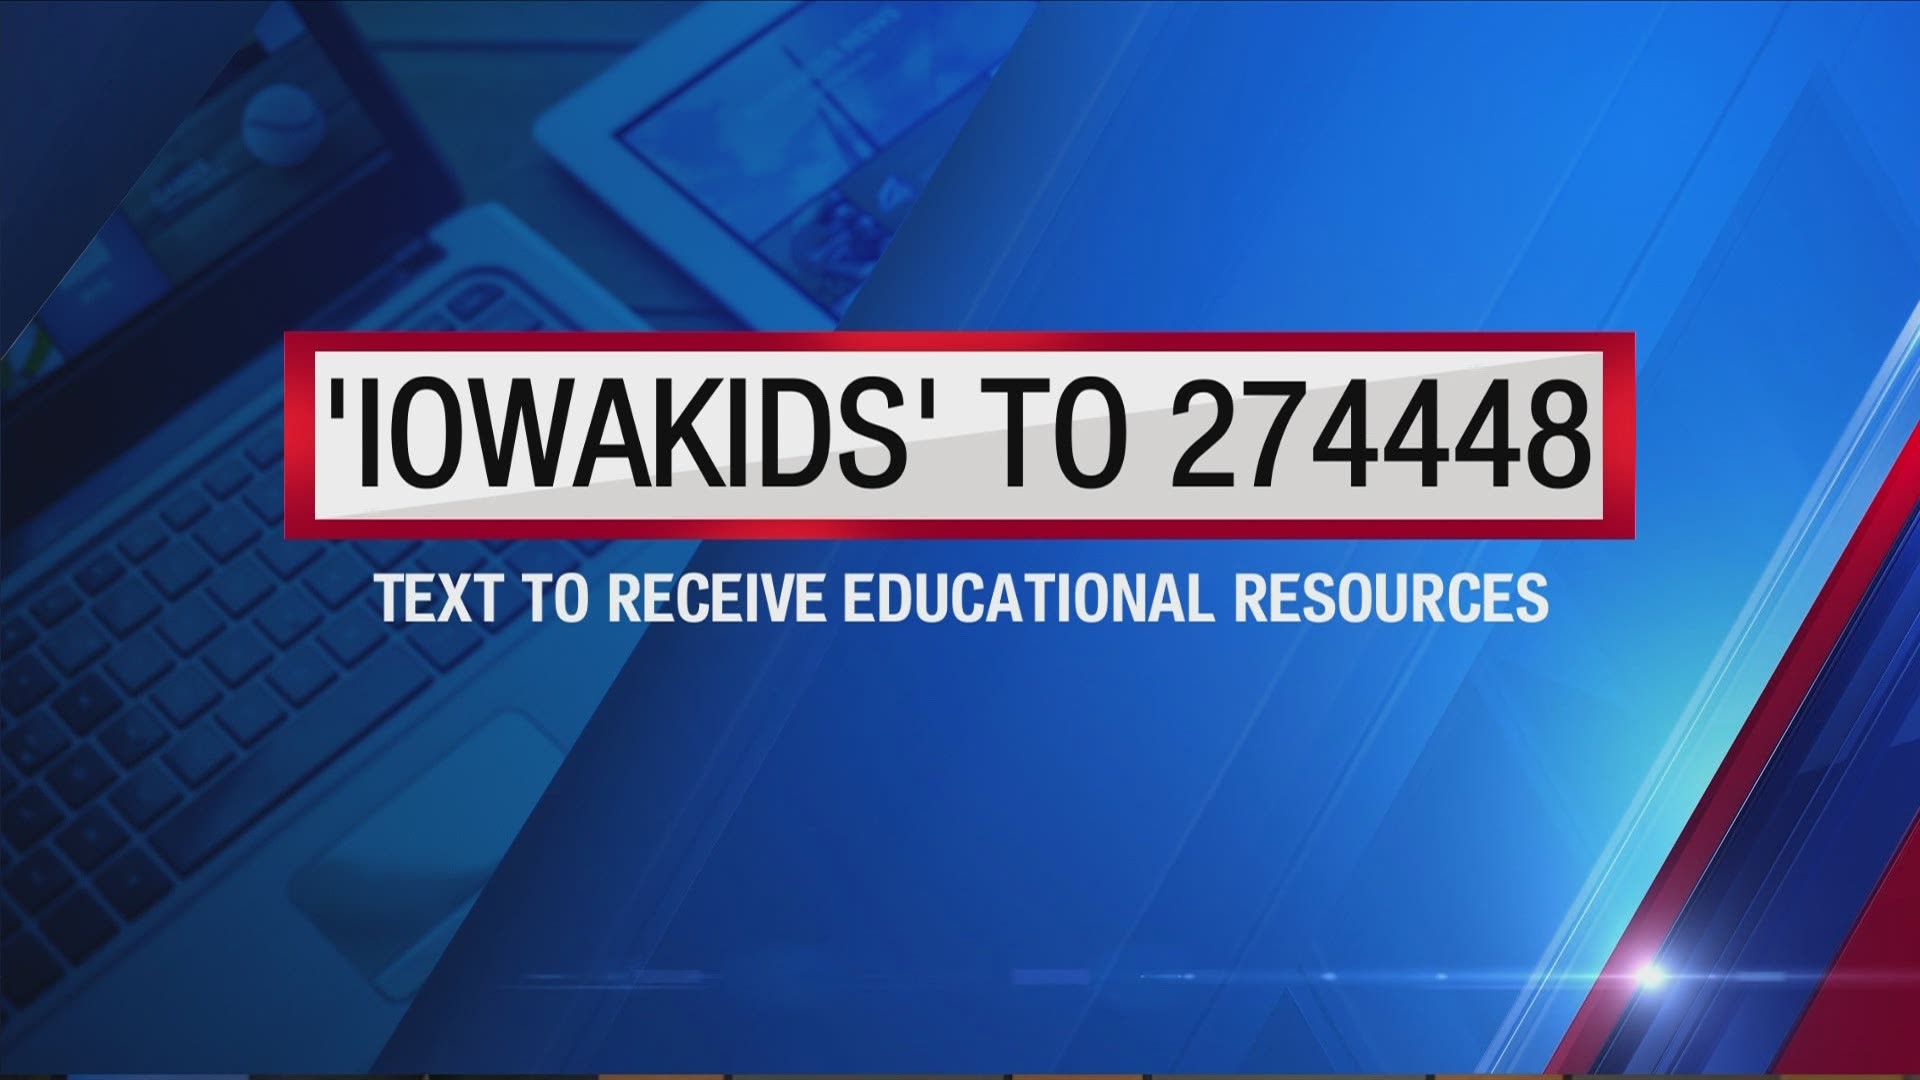 Local 5's Elias Johnson reports on some of the support United Way of Central Iowa is offering families.